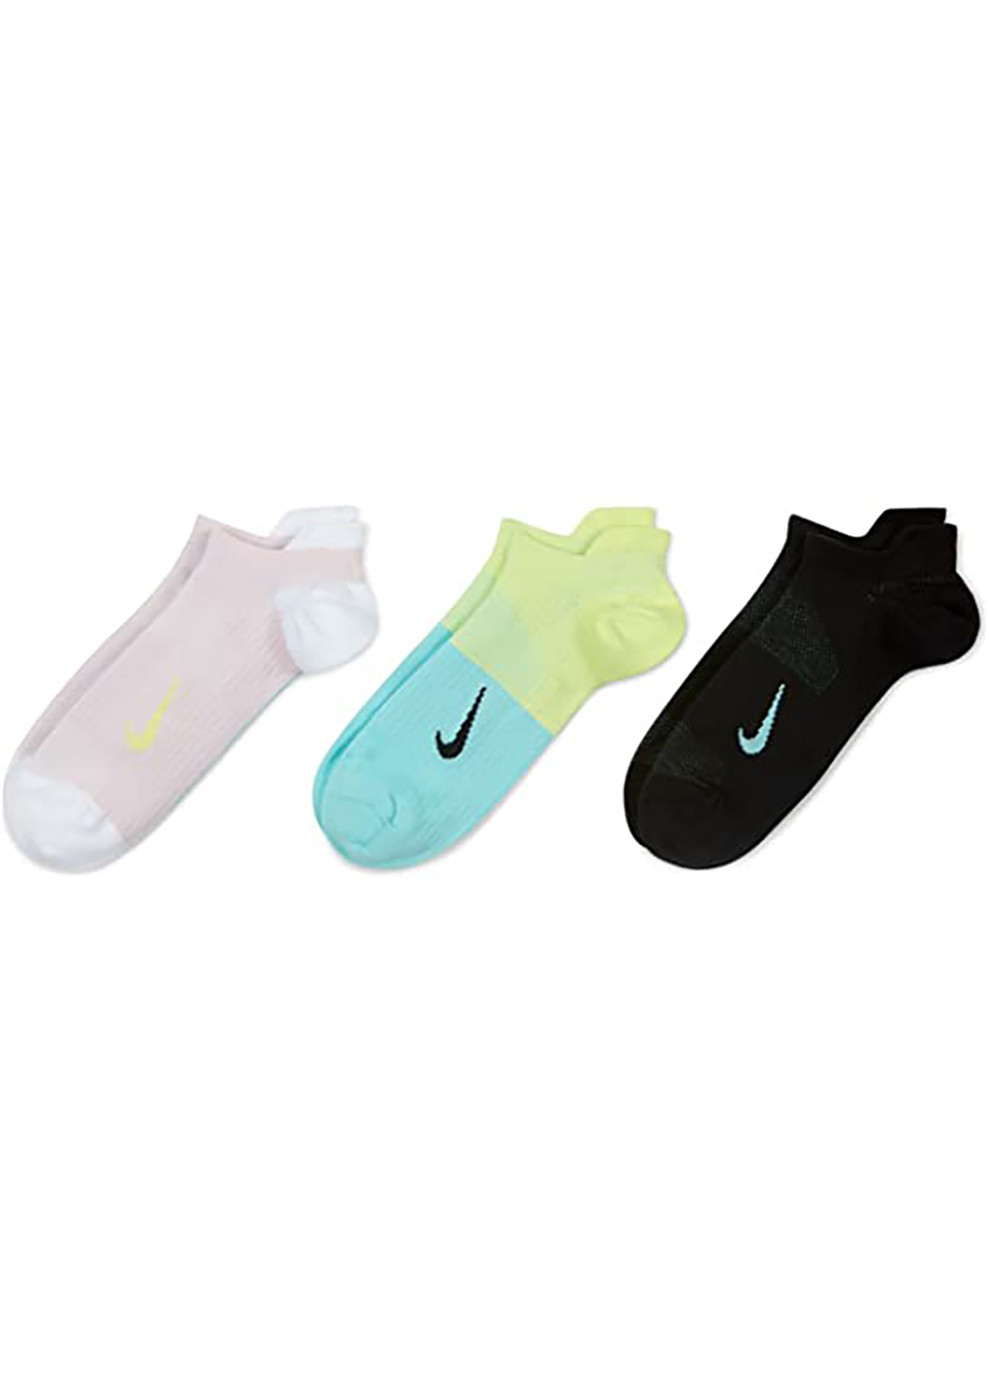 Носки W Nk Everyday Plus Ltwt Ns 3-pack multicolor Nike (260792234)